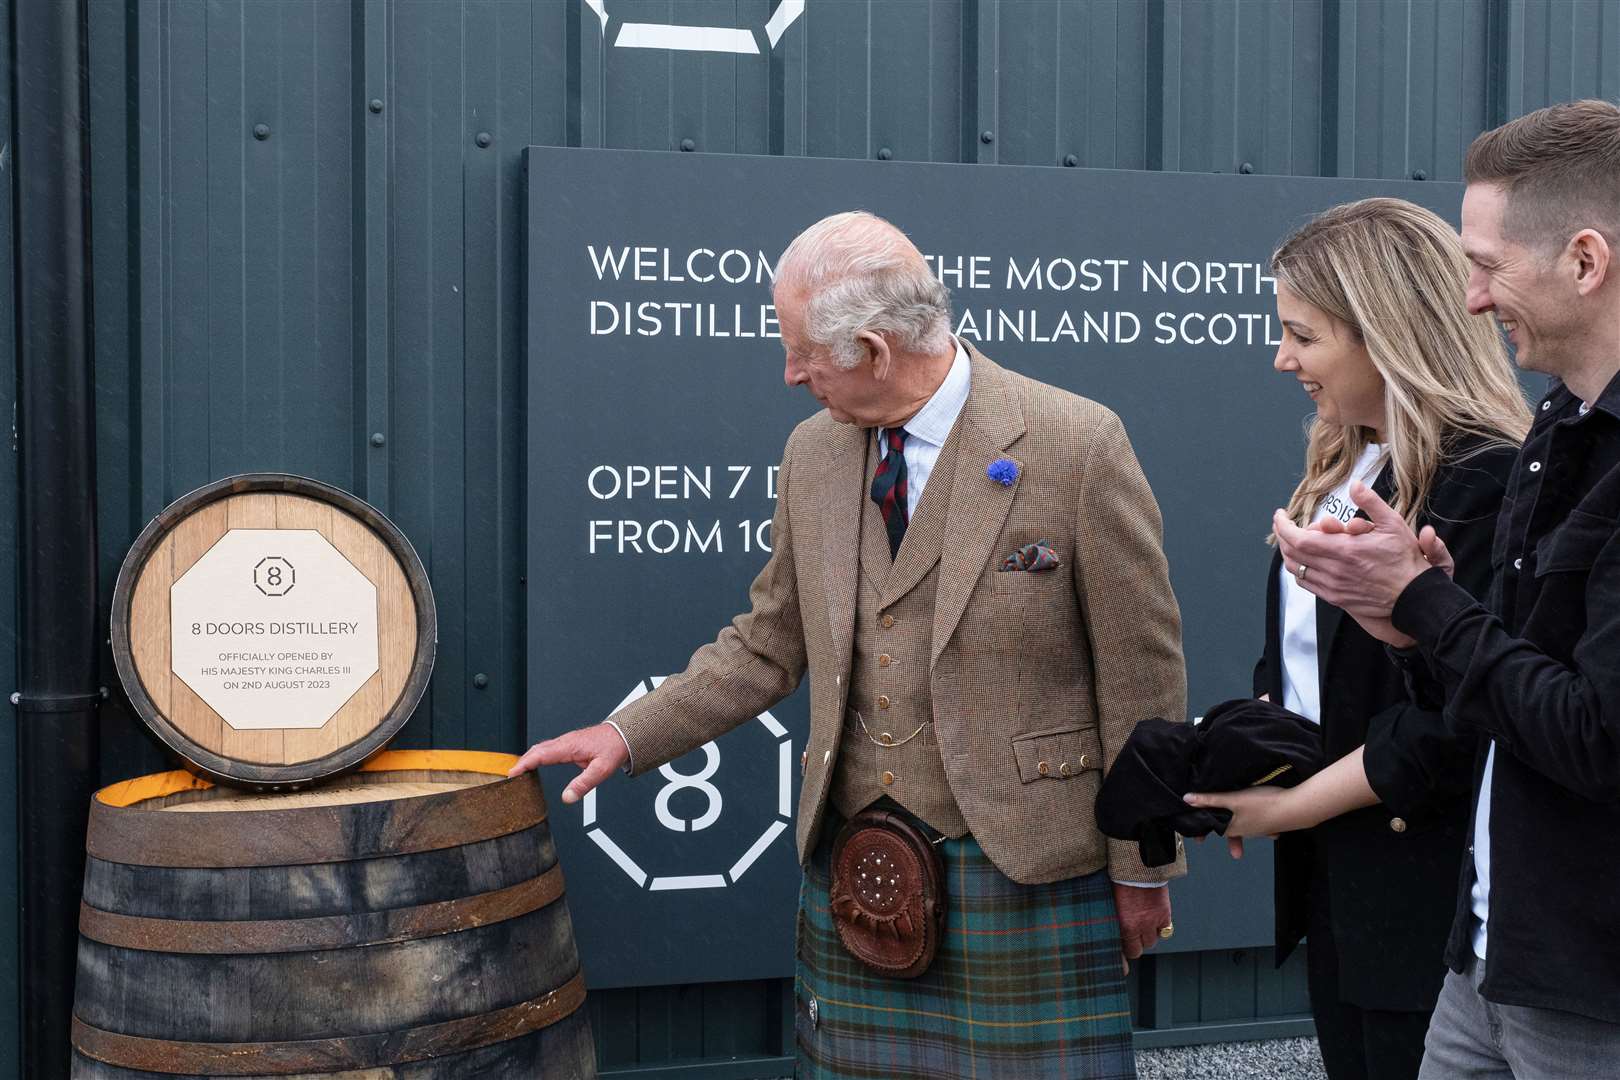 The King unveiling the plaque at 8 Doors Distillery this summer, with owners Kerry and Derek Campbell looking on. Picture: Susie Mackenzie